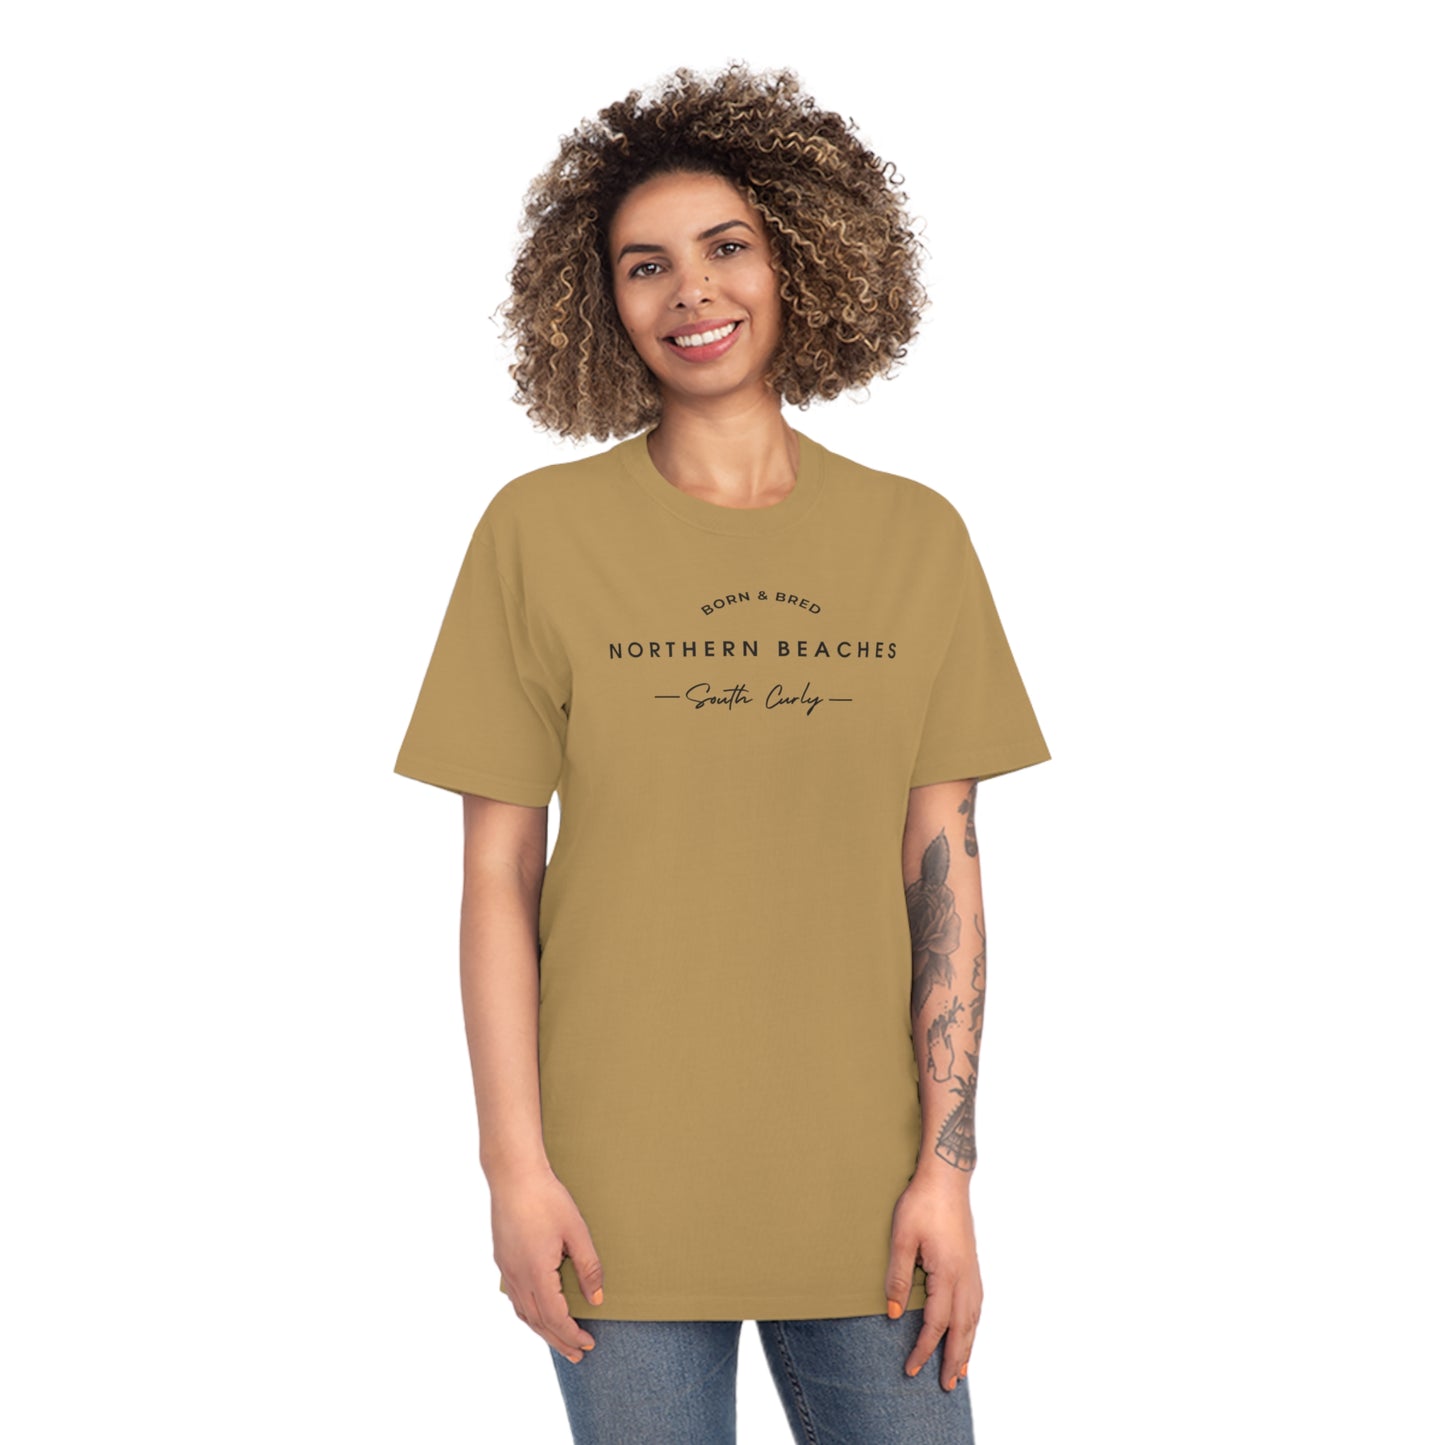 Northern Beaches Sth Curly bnb AS Colour 100% Cotton Unisex Faded Shirt